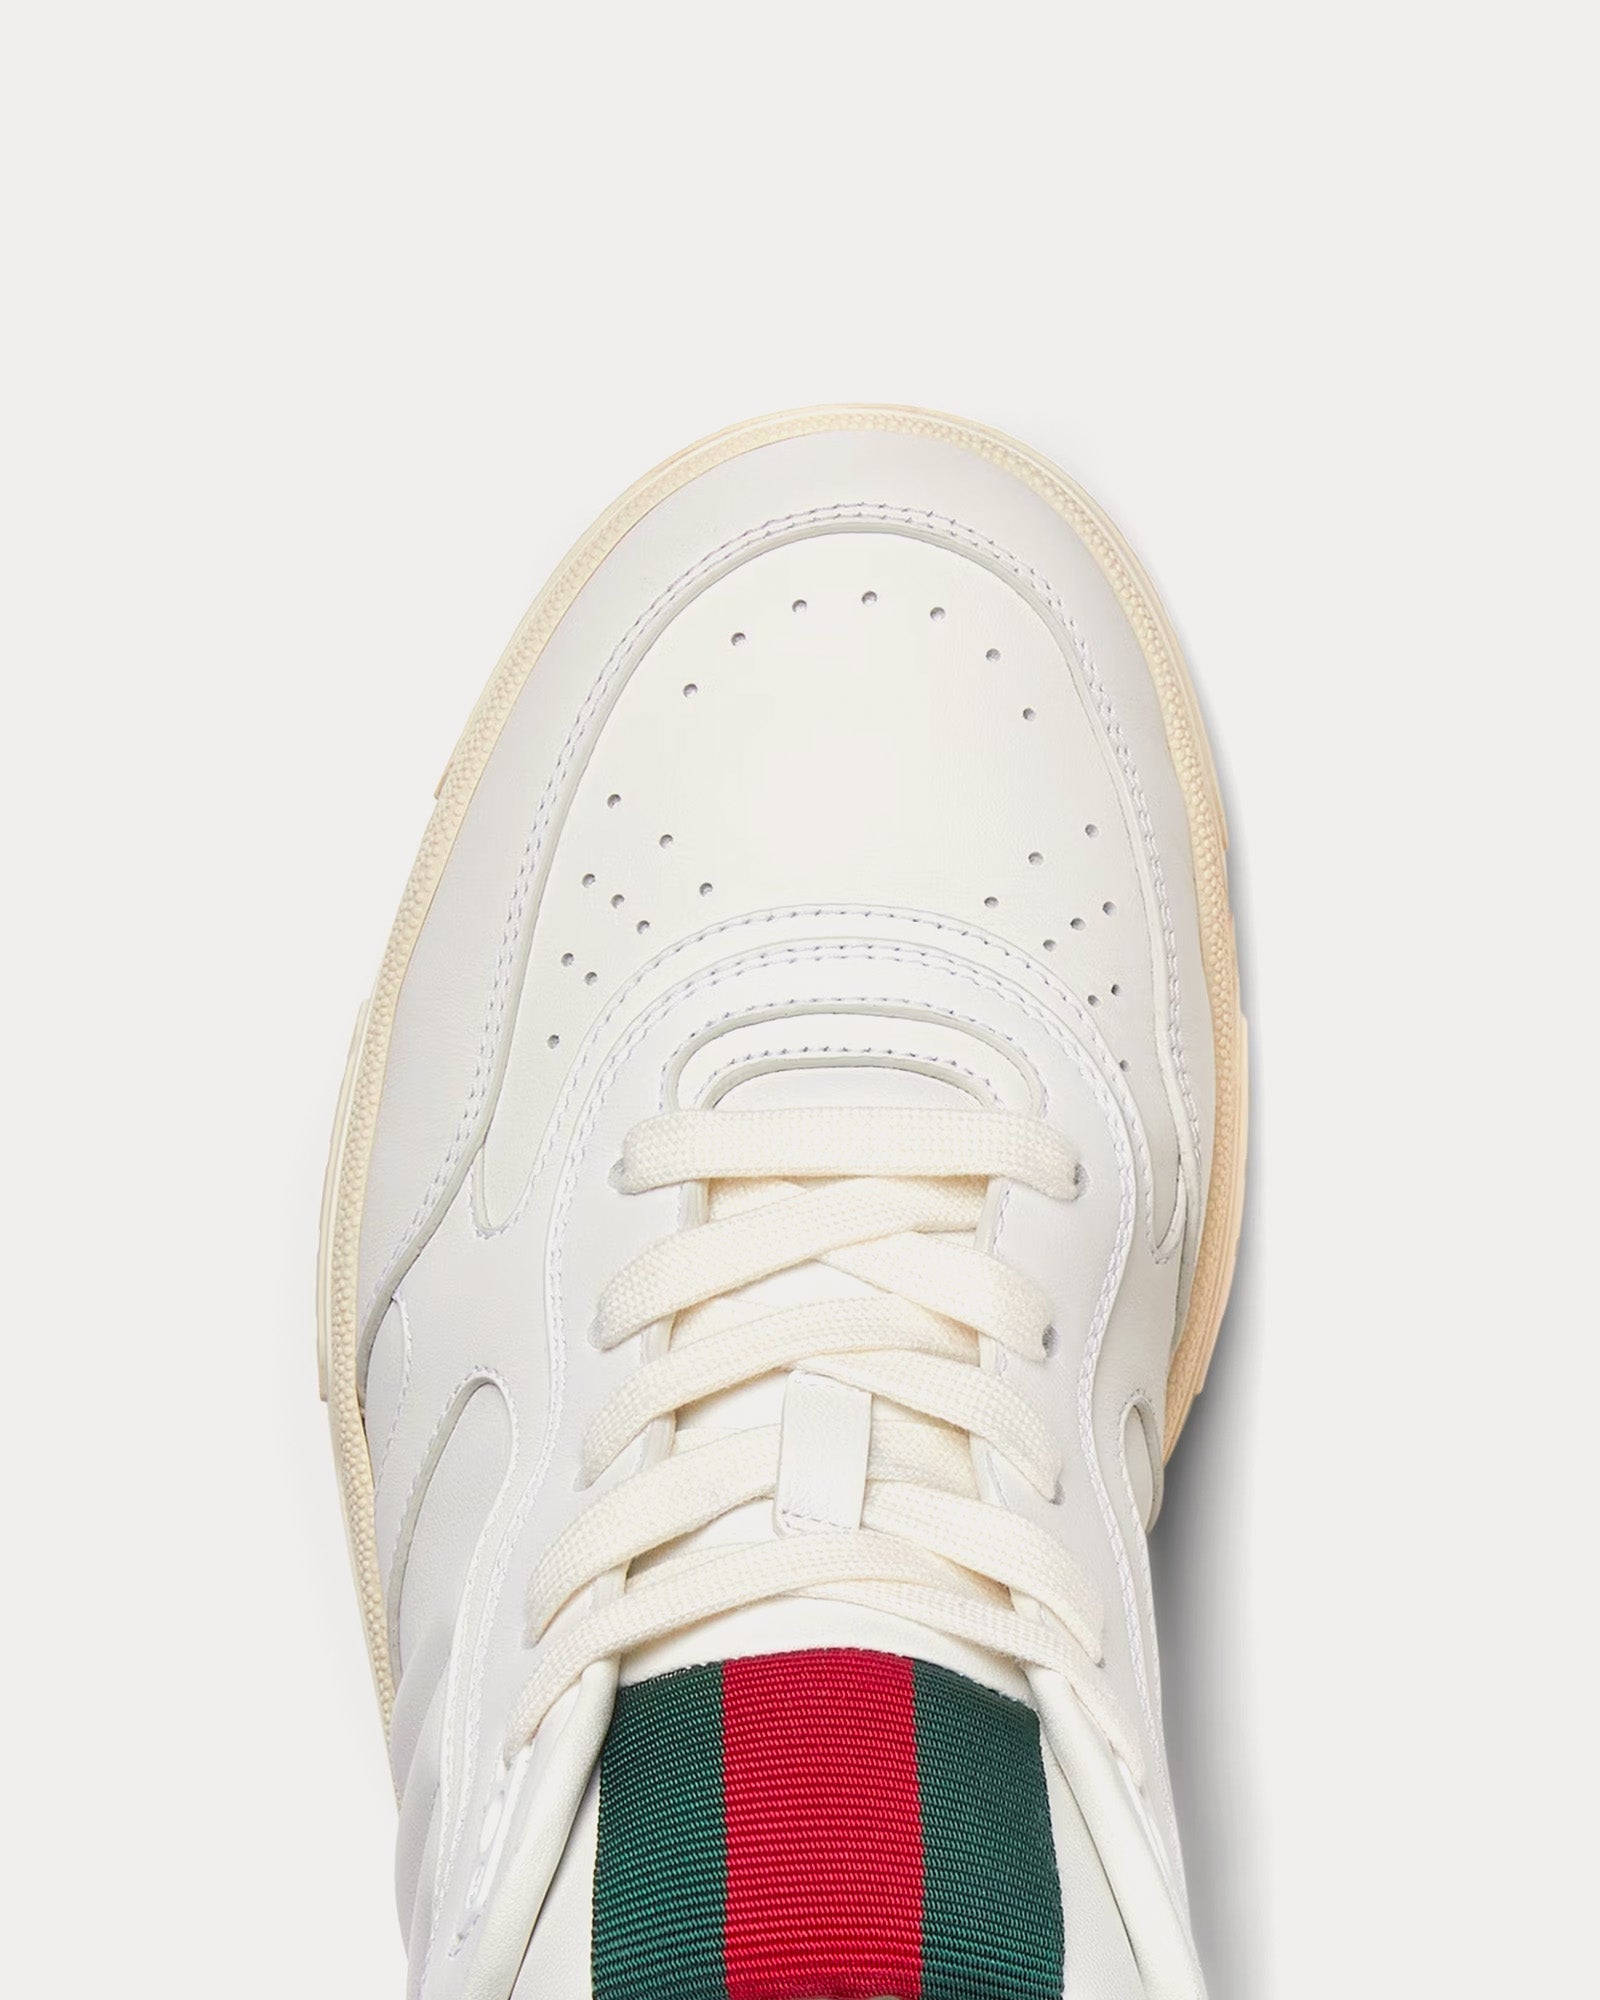 Gucci - Re-Web Leather White Low Top Sneakers